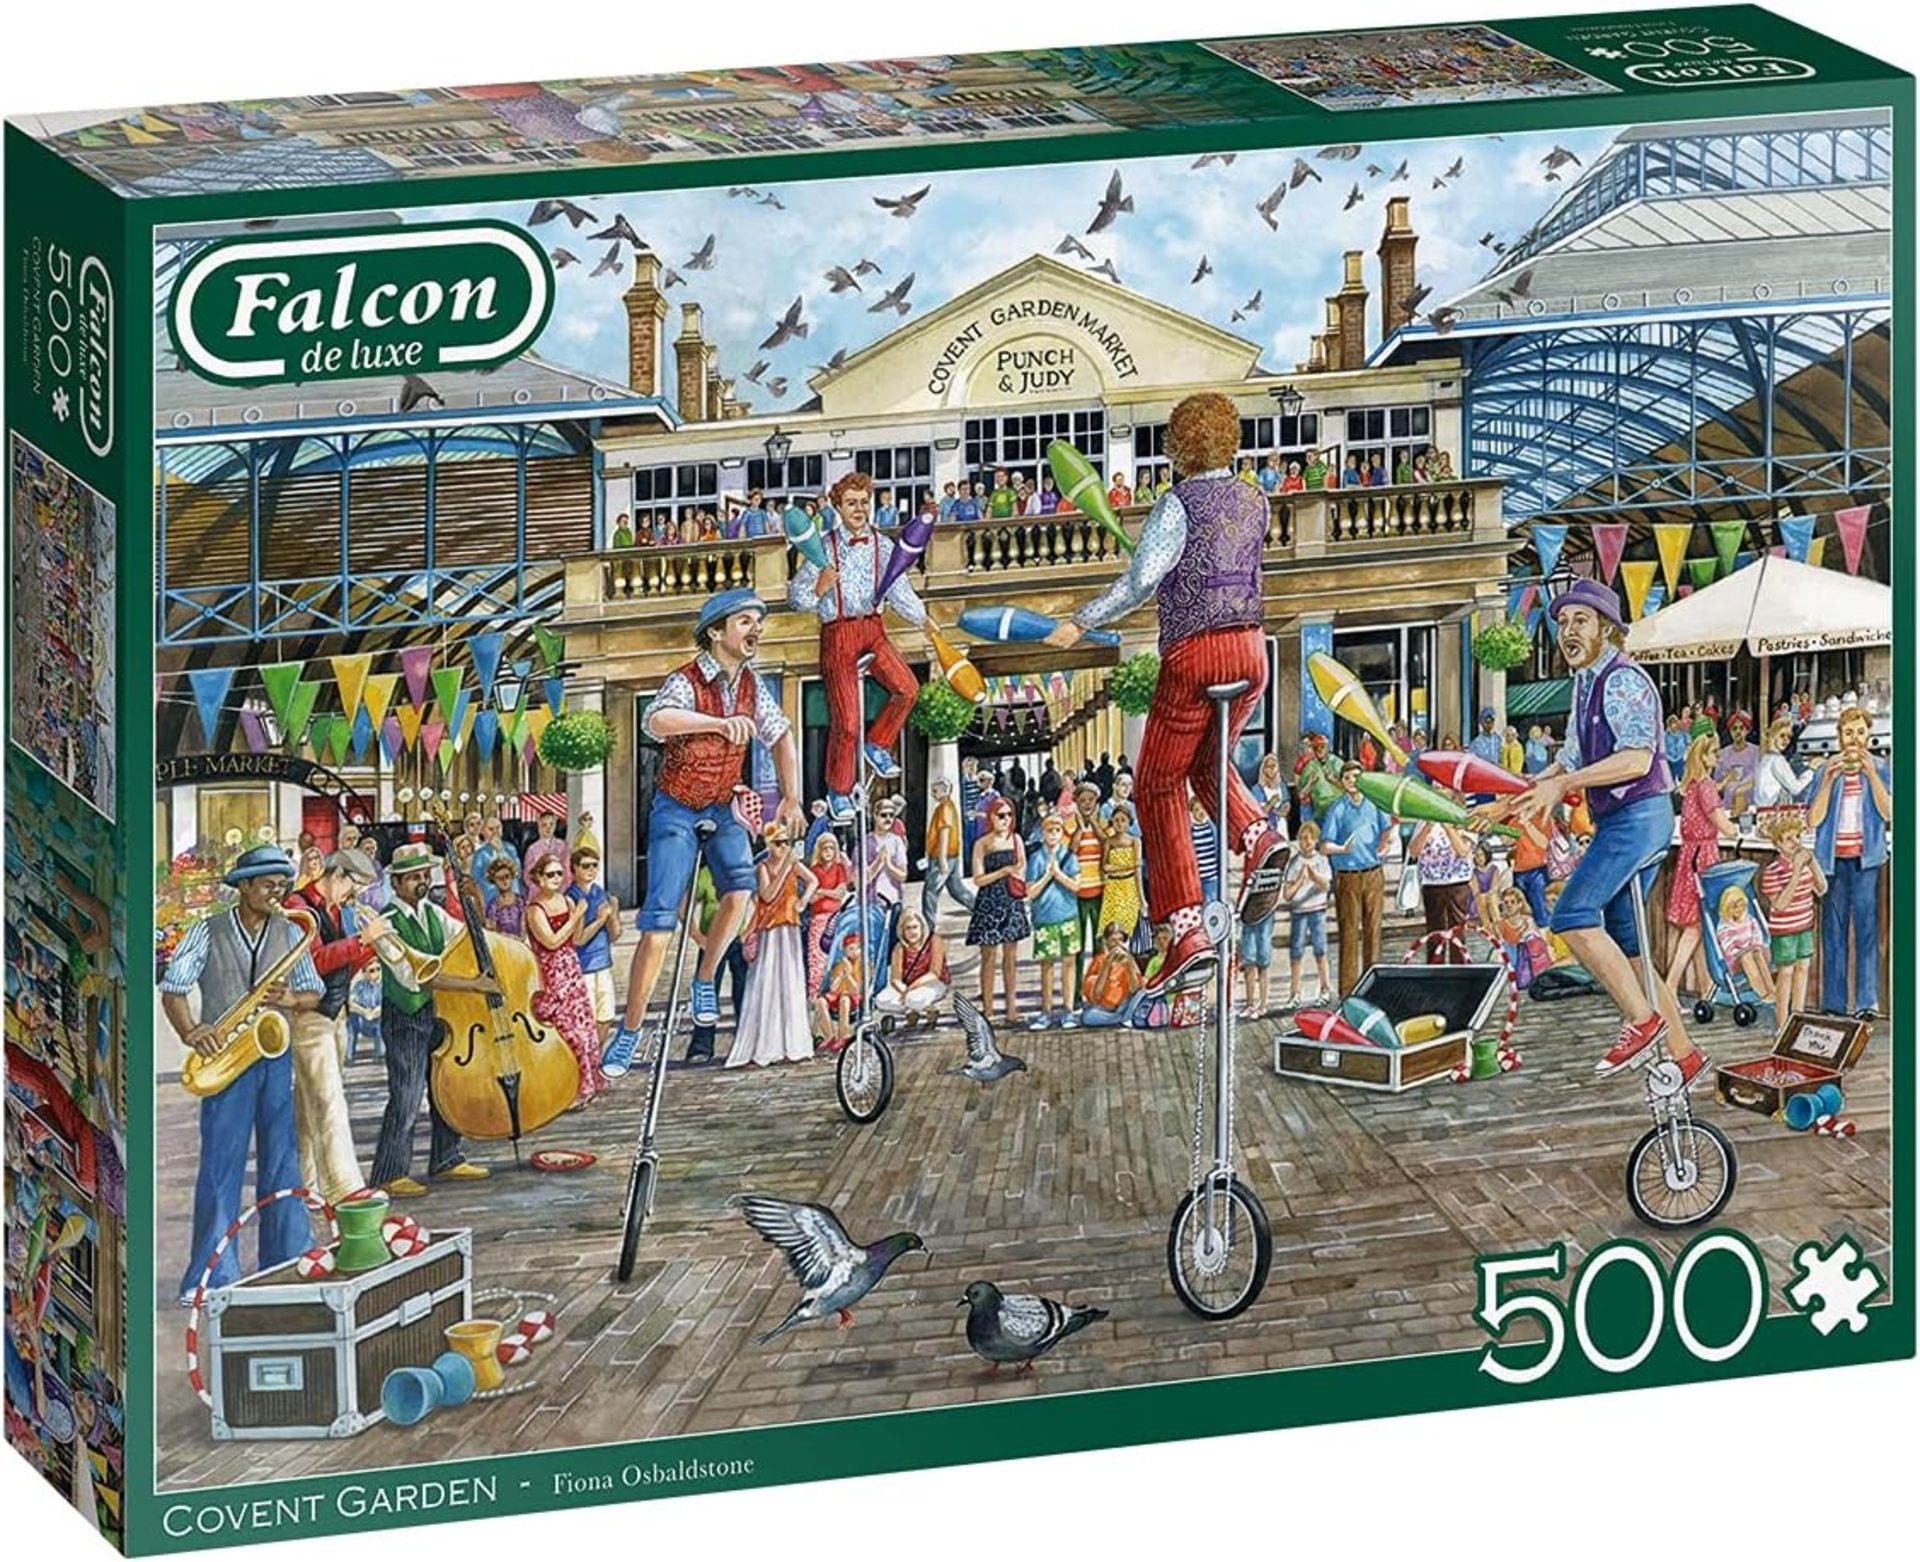 25 X NEW COVENT GARDEN 500PC JIGSAW - Image 5 of 5